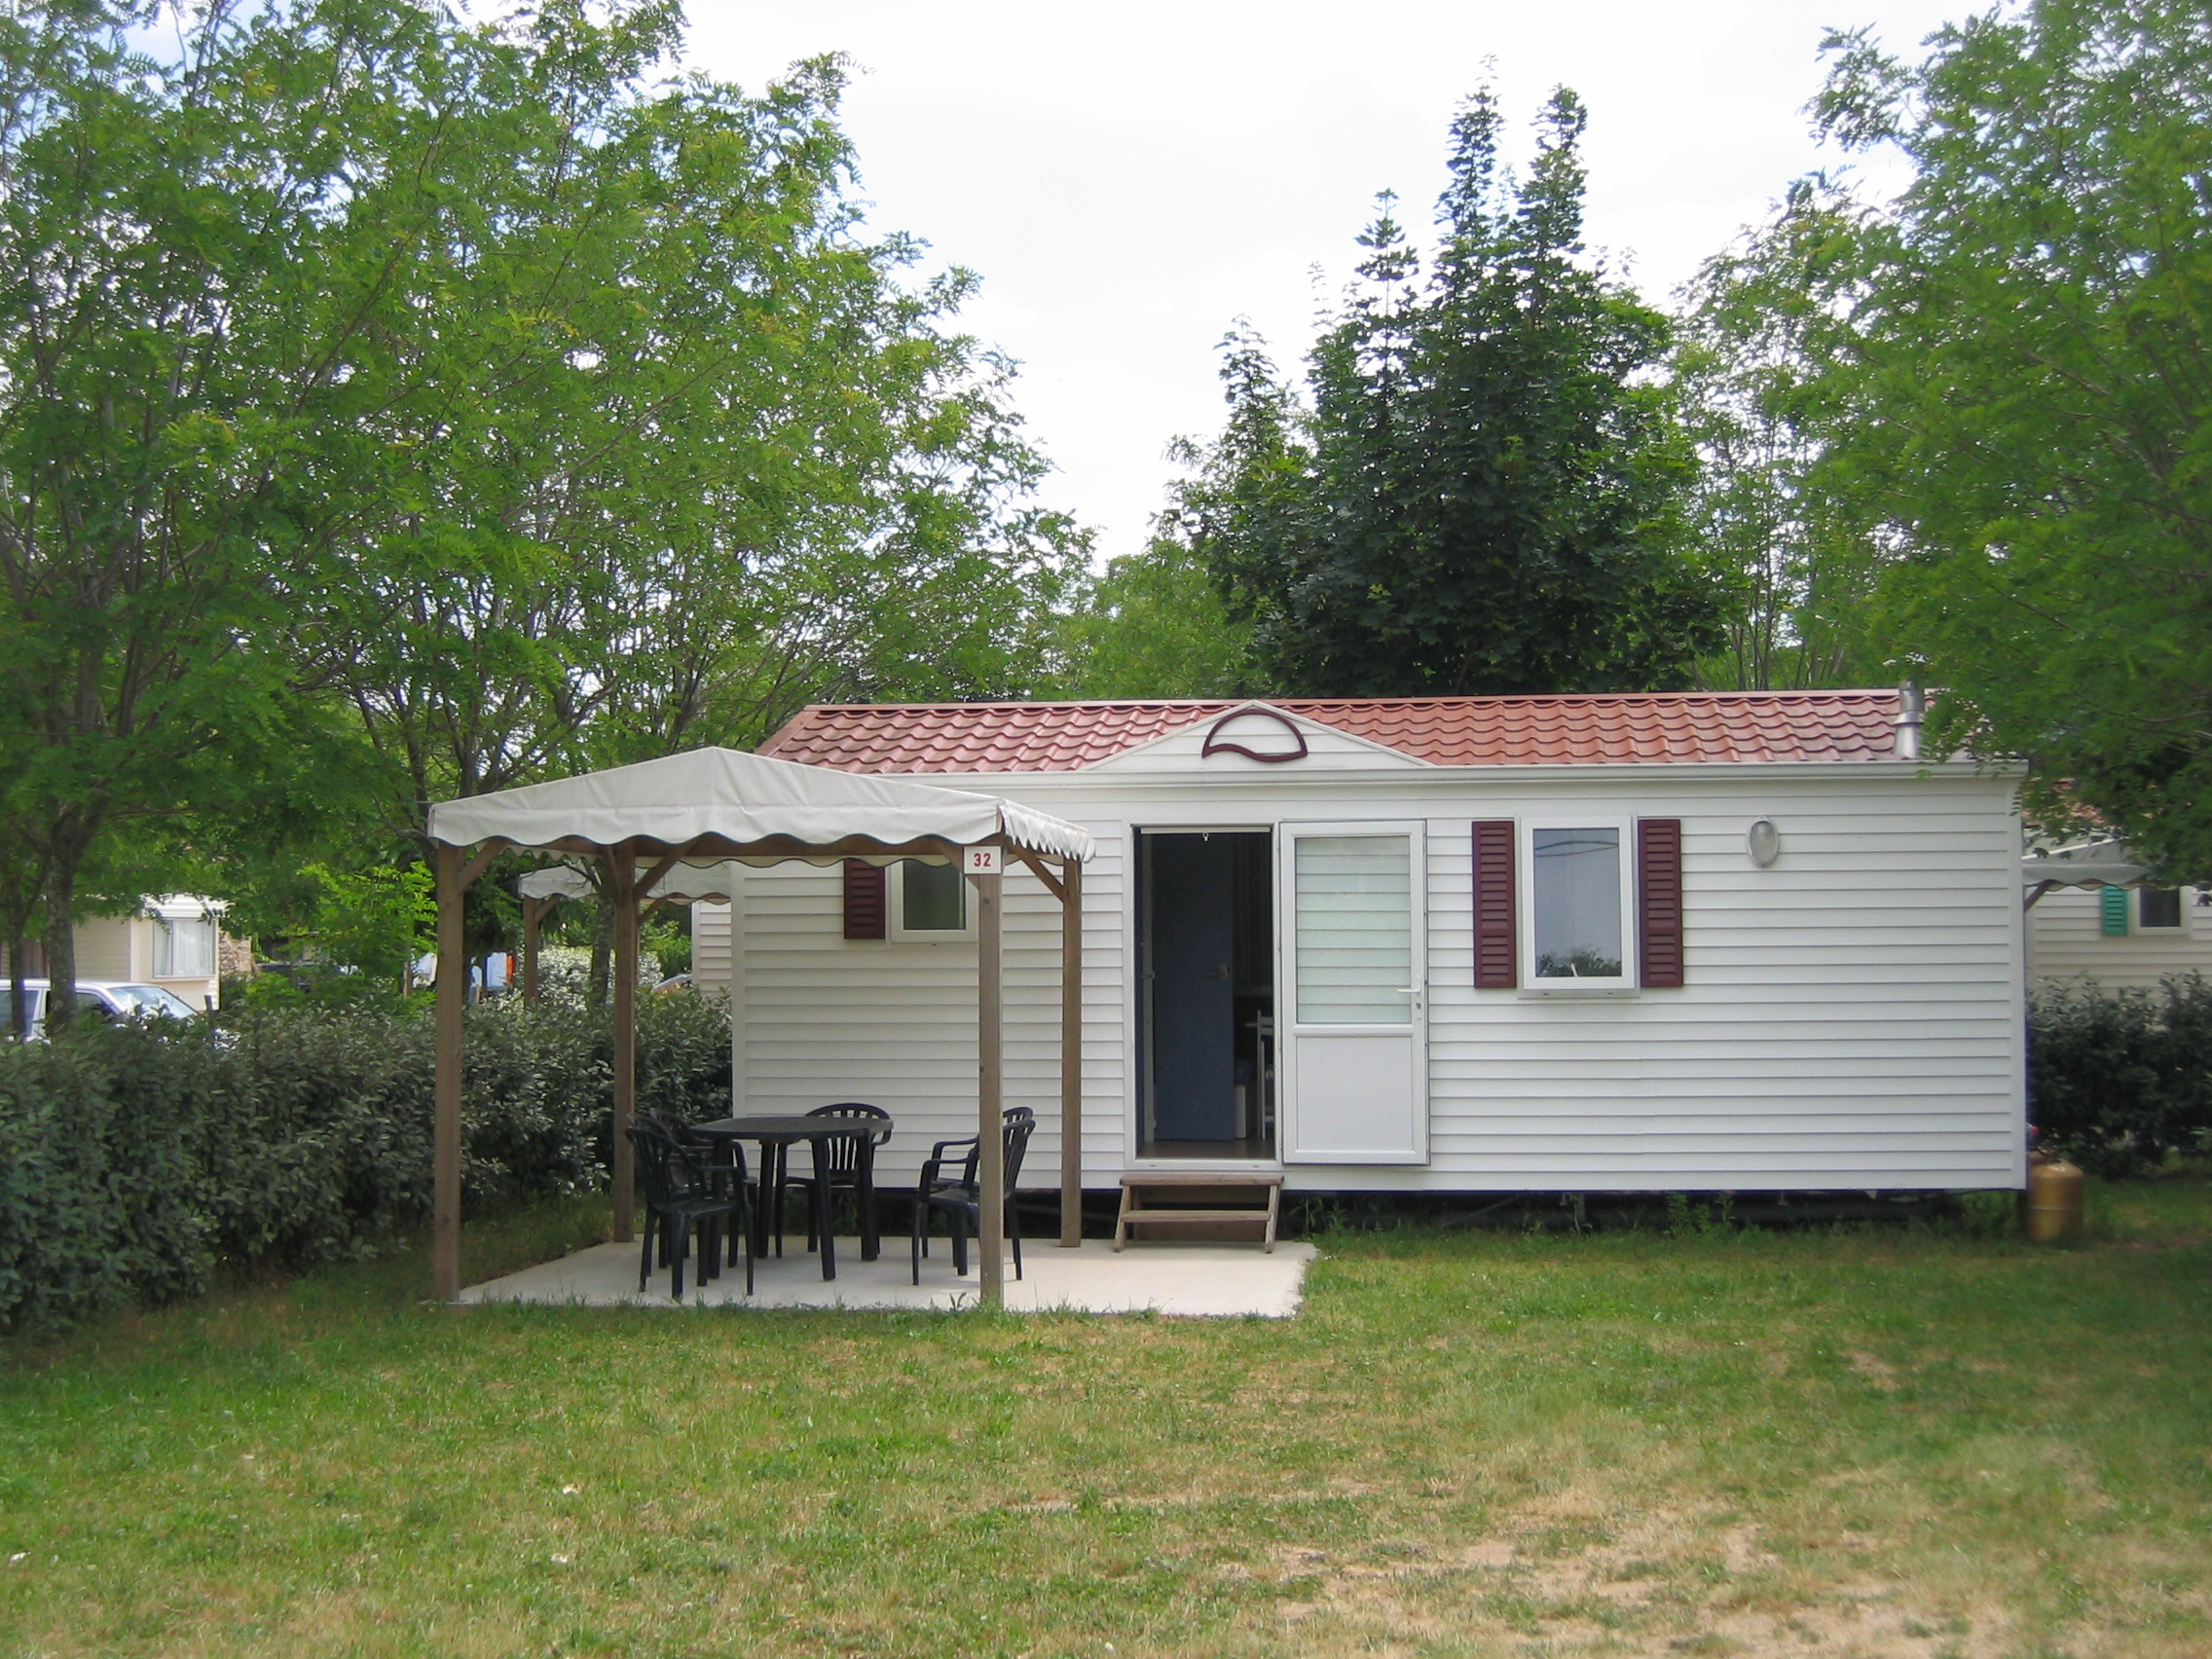 Huuraccommodatie - Mobil Home 2 Bedrooms With Air Conditioning - CAMPING LES HORTENSIAS